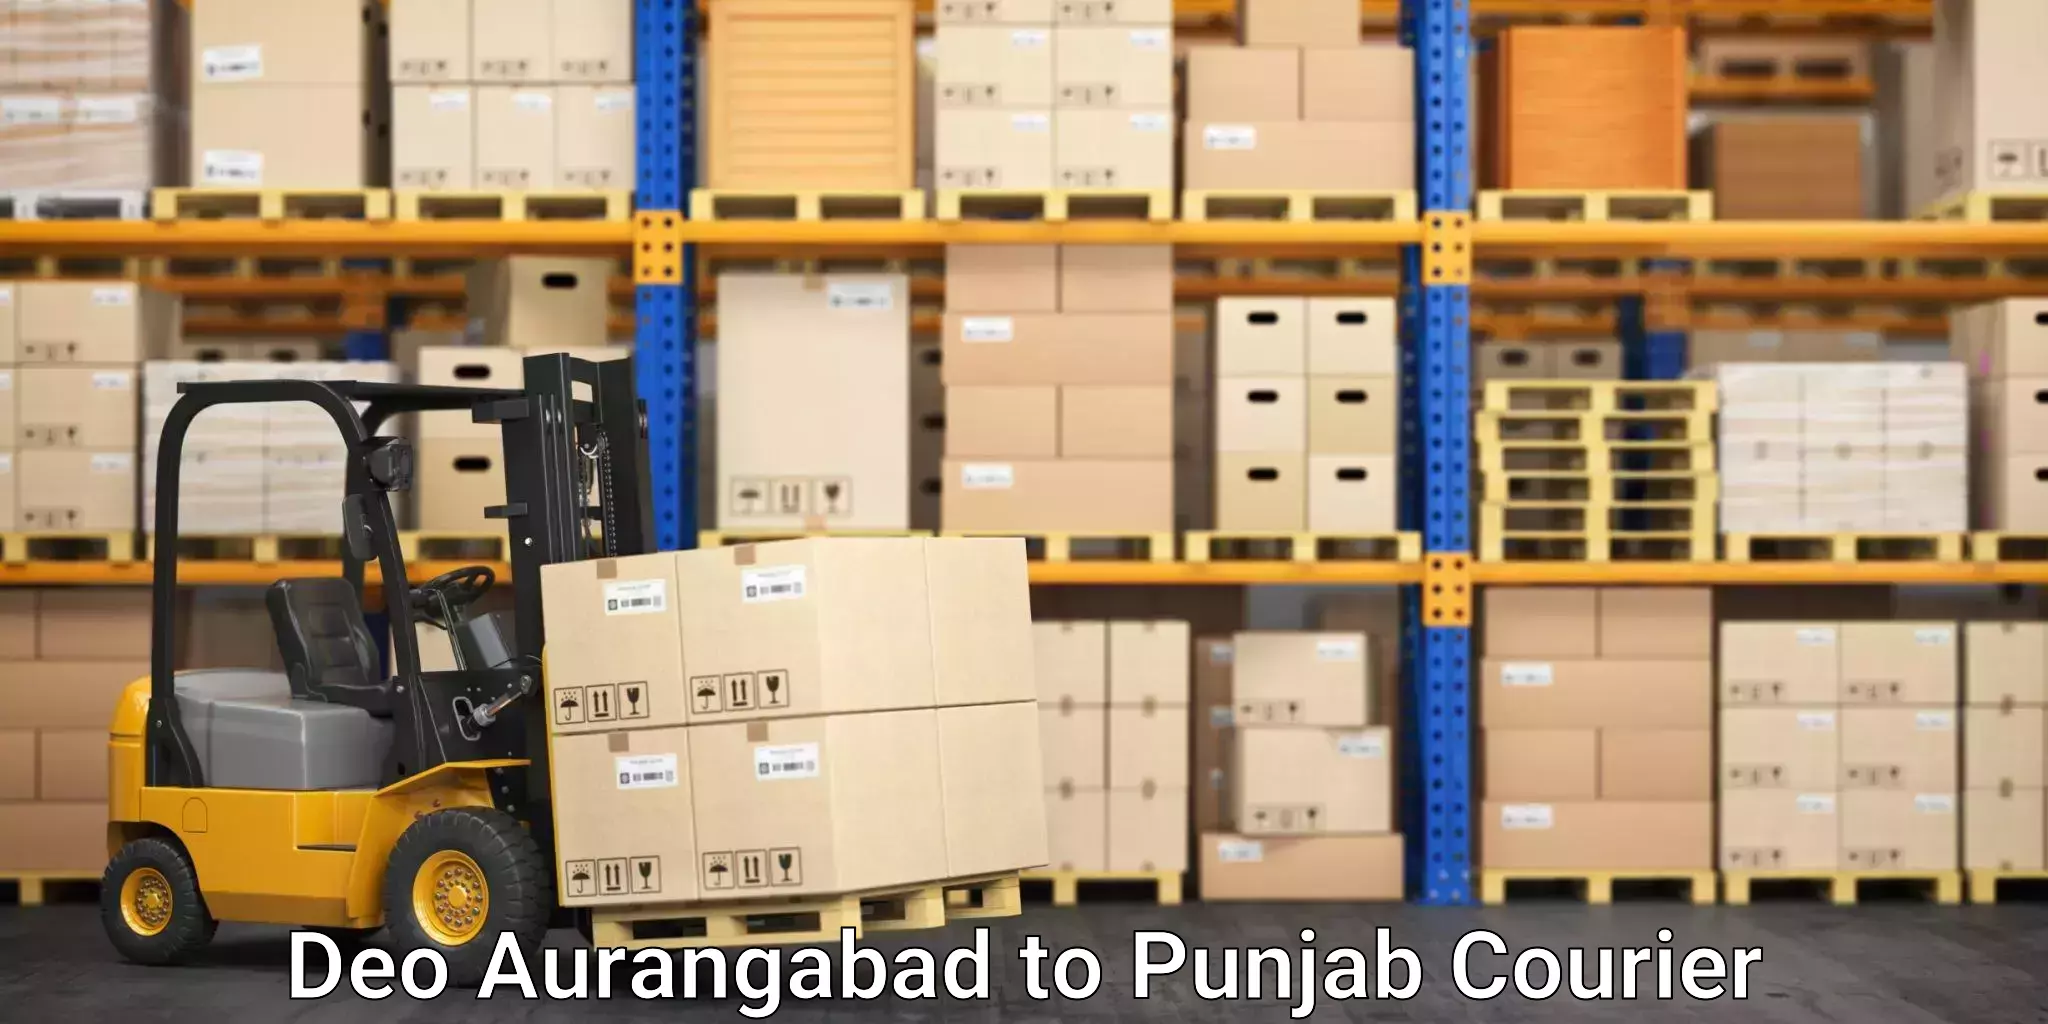 Efficient packing and moving Deo Aurangabad to Dhuri